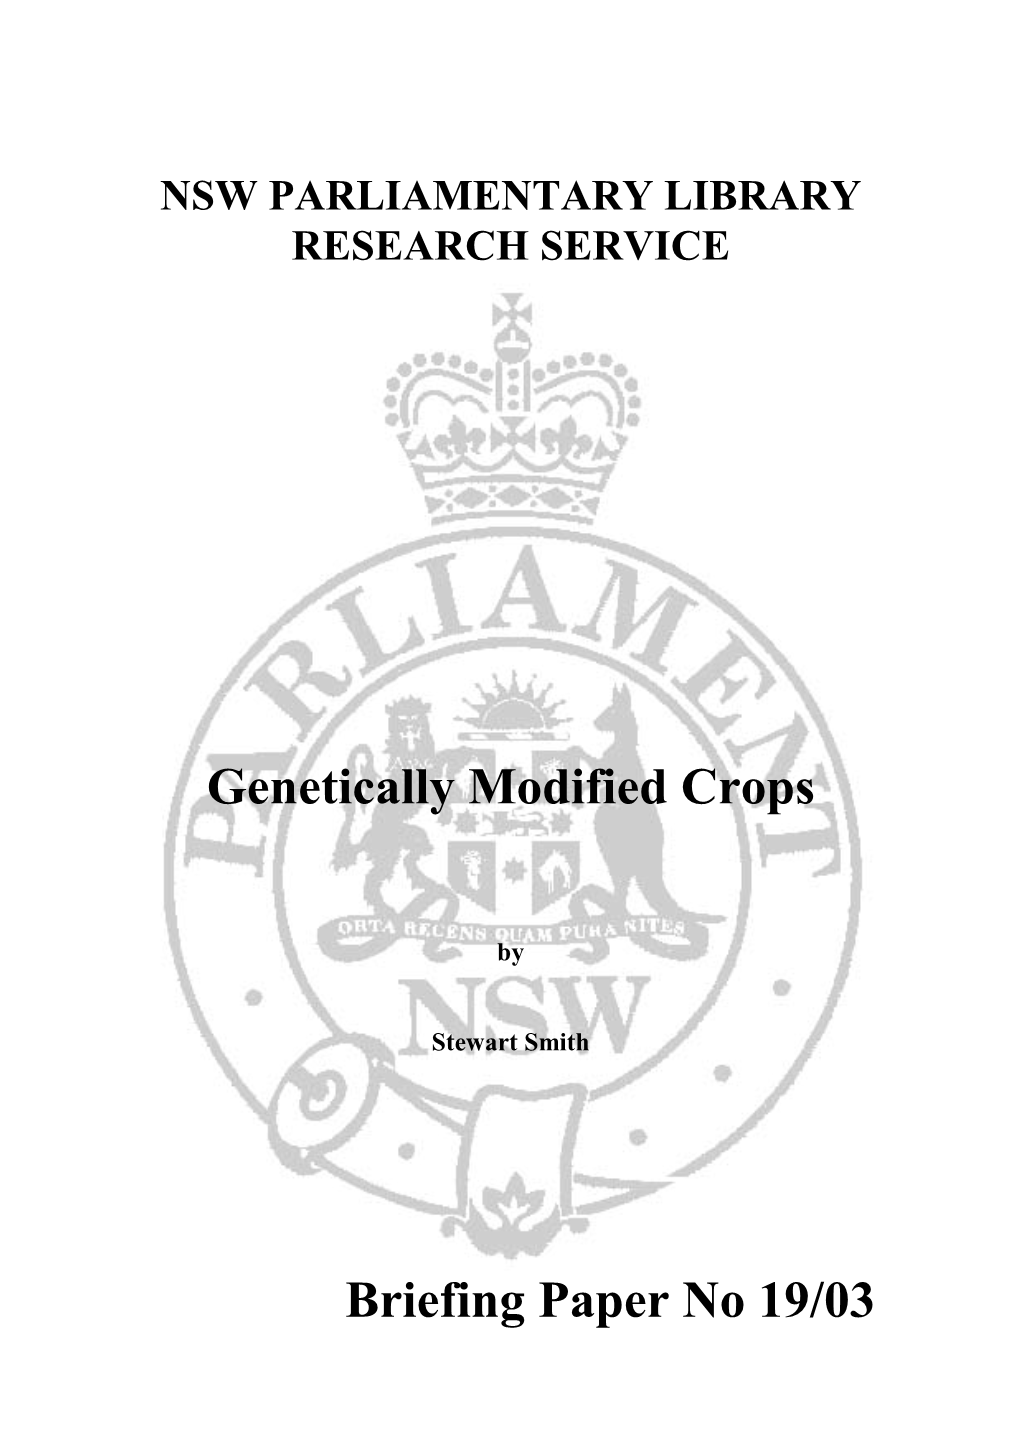 Genetically Modified Crops Briefing Paper No 19/03